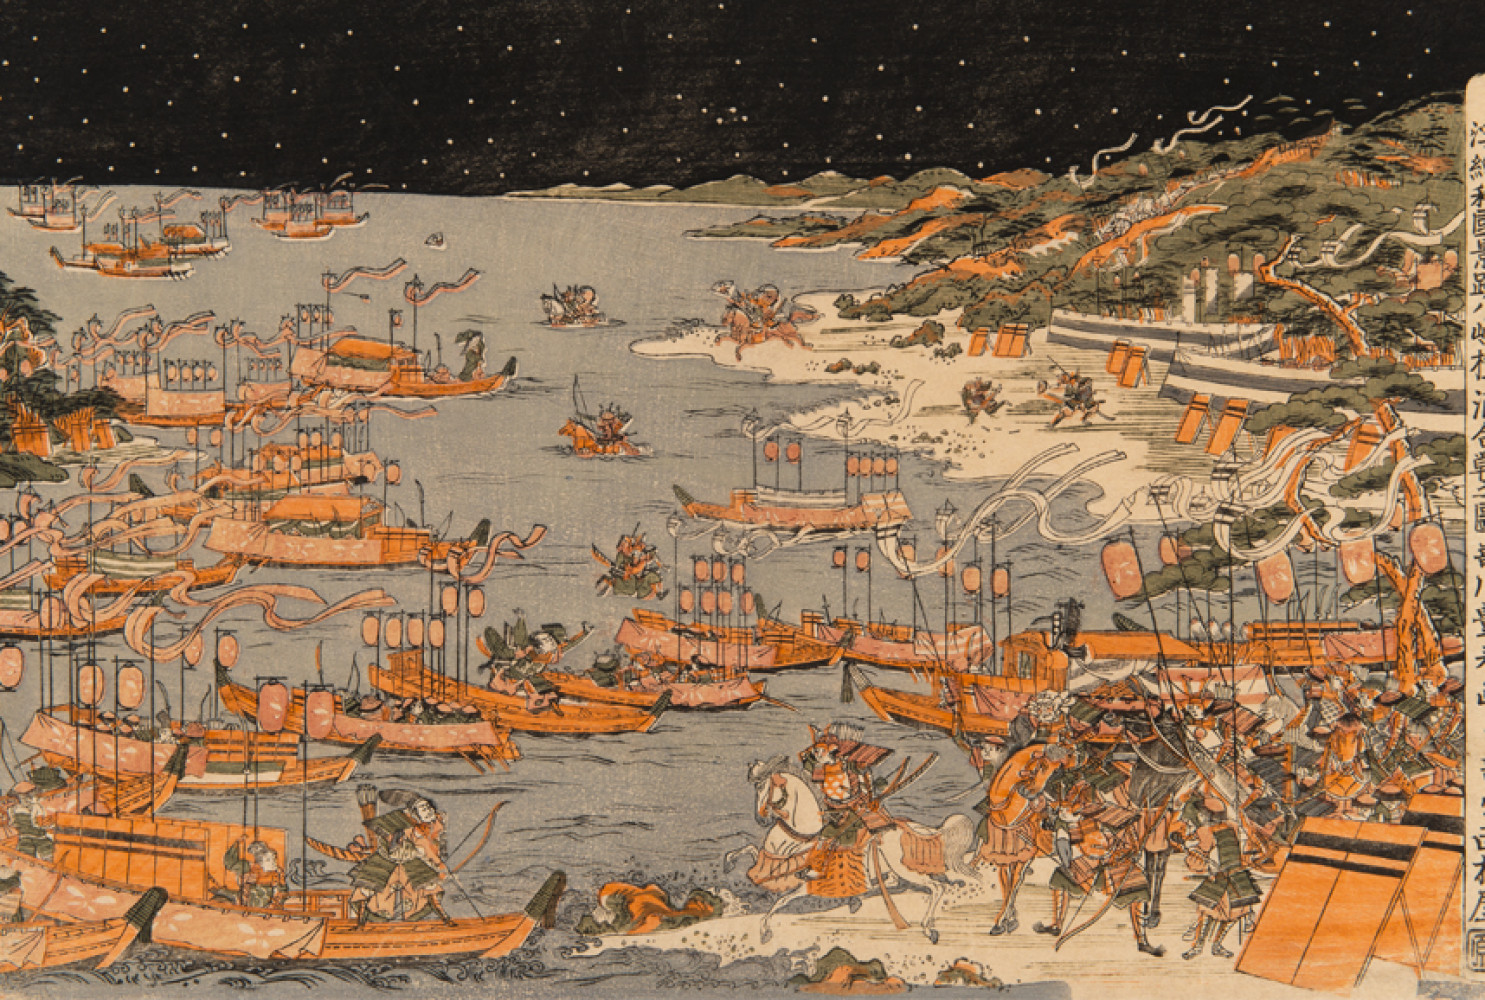 UTAGAWA TOYOHARU (1735—1814) The Battle of Yashima Dan-no-ura from the series Perspective Pictures of Japanese Scenes, ca. 1775. Color woodblock print, 10 1/4 x 15 5/8 inches. 